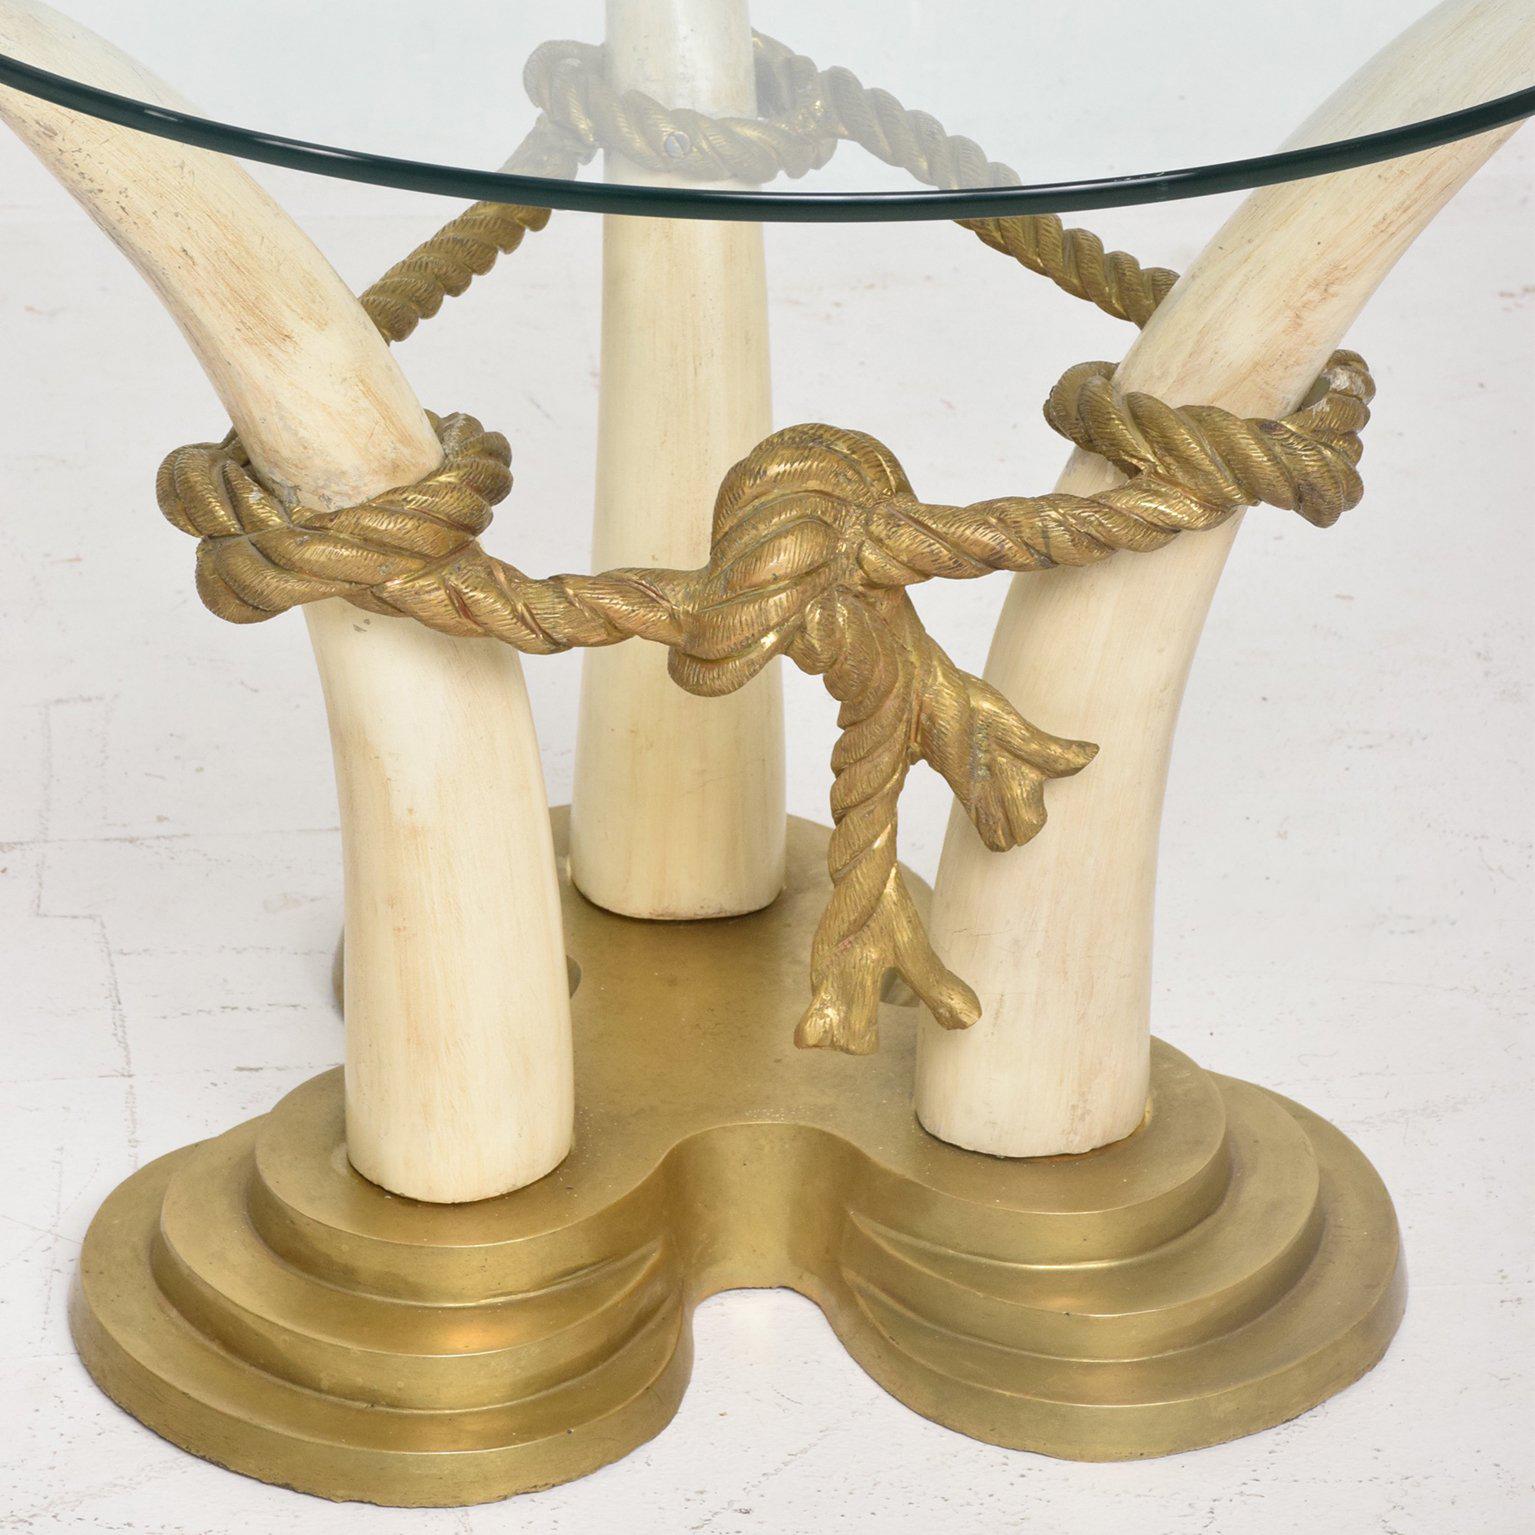 Spanish Hollywood Regency Pair of Side Tables Faux Ivory and Bronze by Valenti, Spain